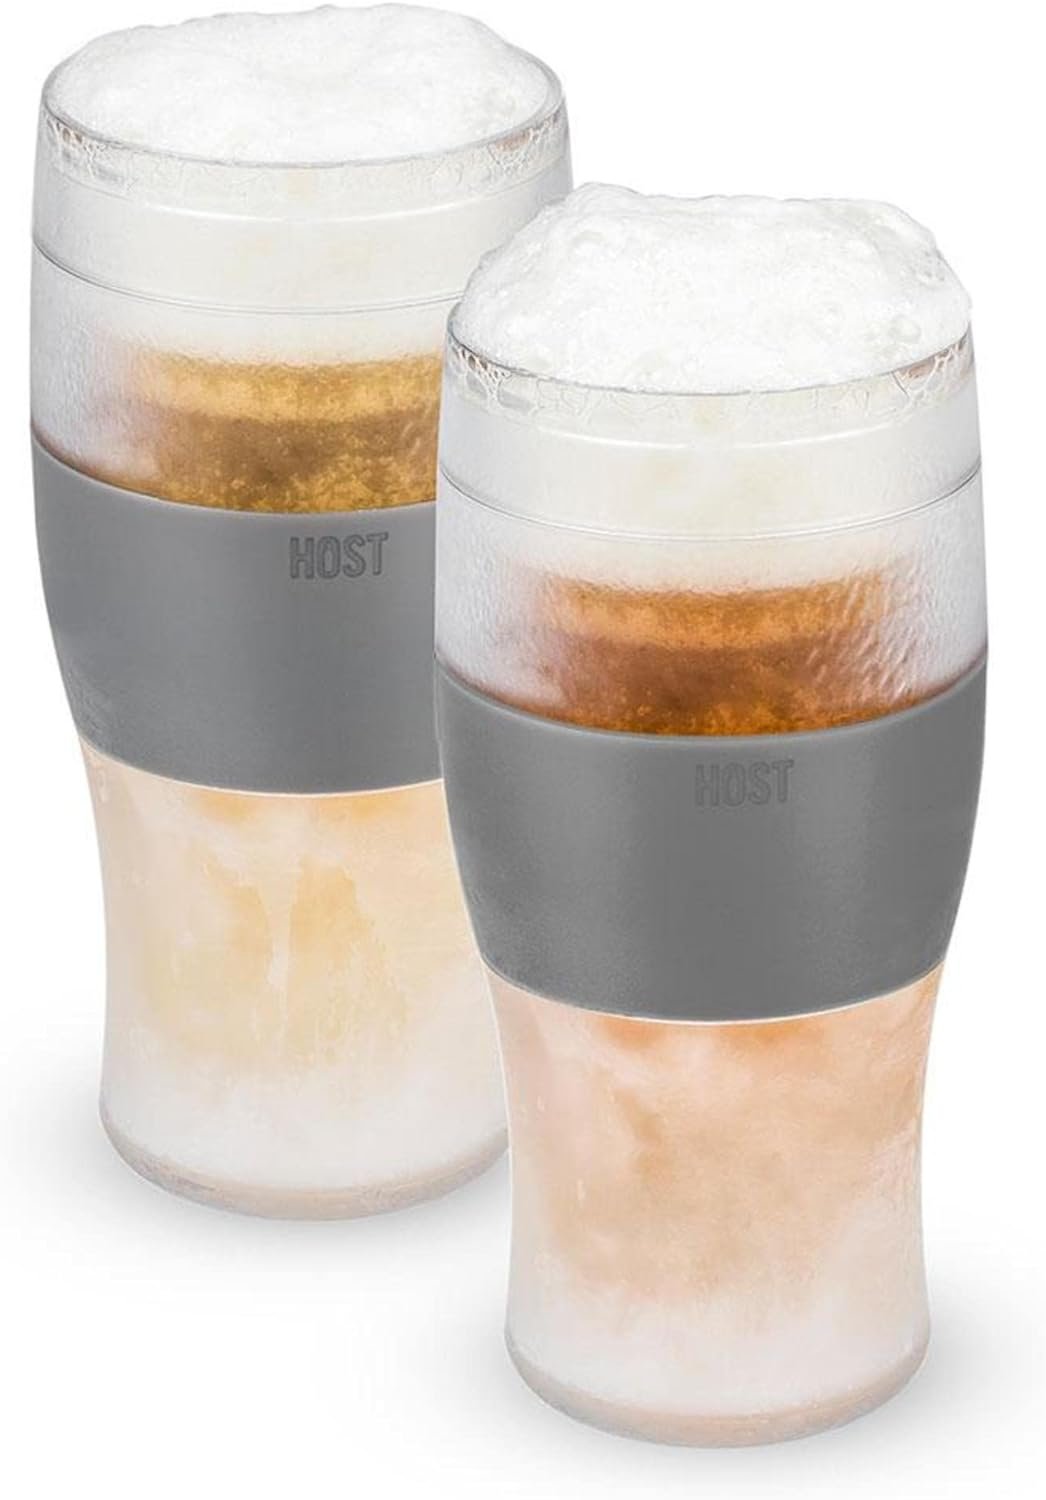 Host FREEZE Beer Glasses, 16oz Frozen Beer Mugs, Freezable Pint Glasses, Fathers Day Gifts, Birthday Gifts for Men, Dad Birthday Gift, Set of 2, Gray